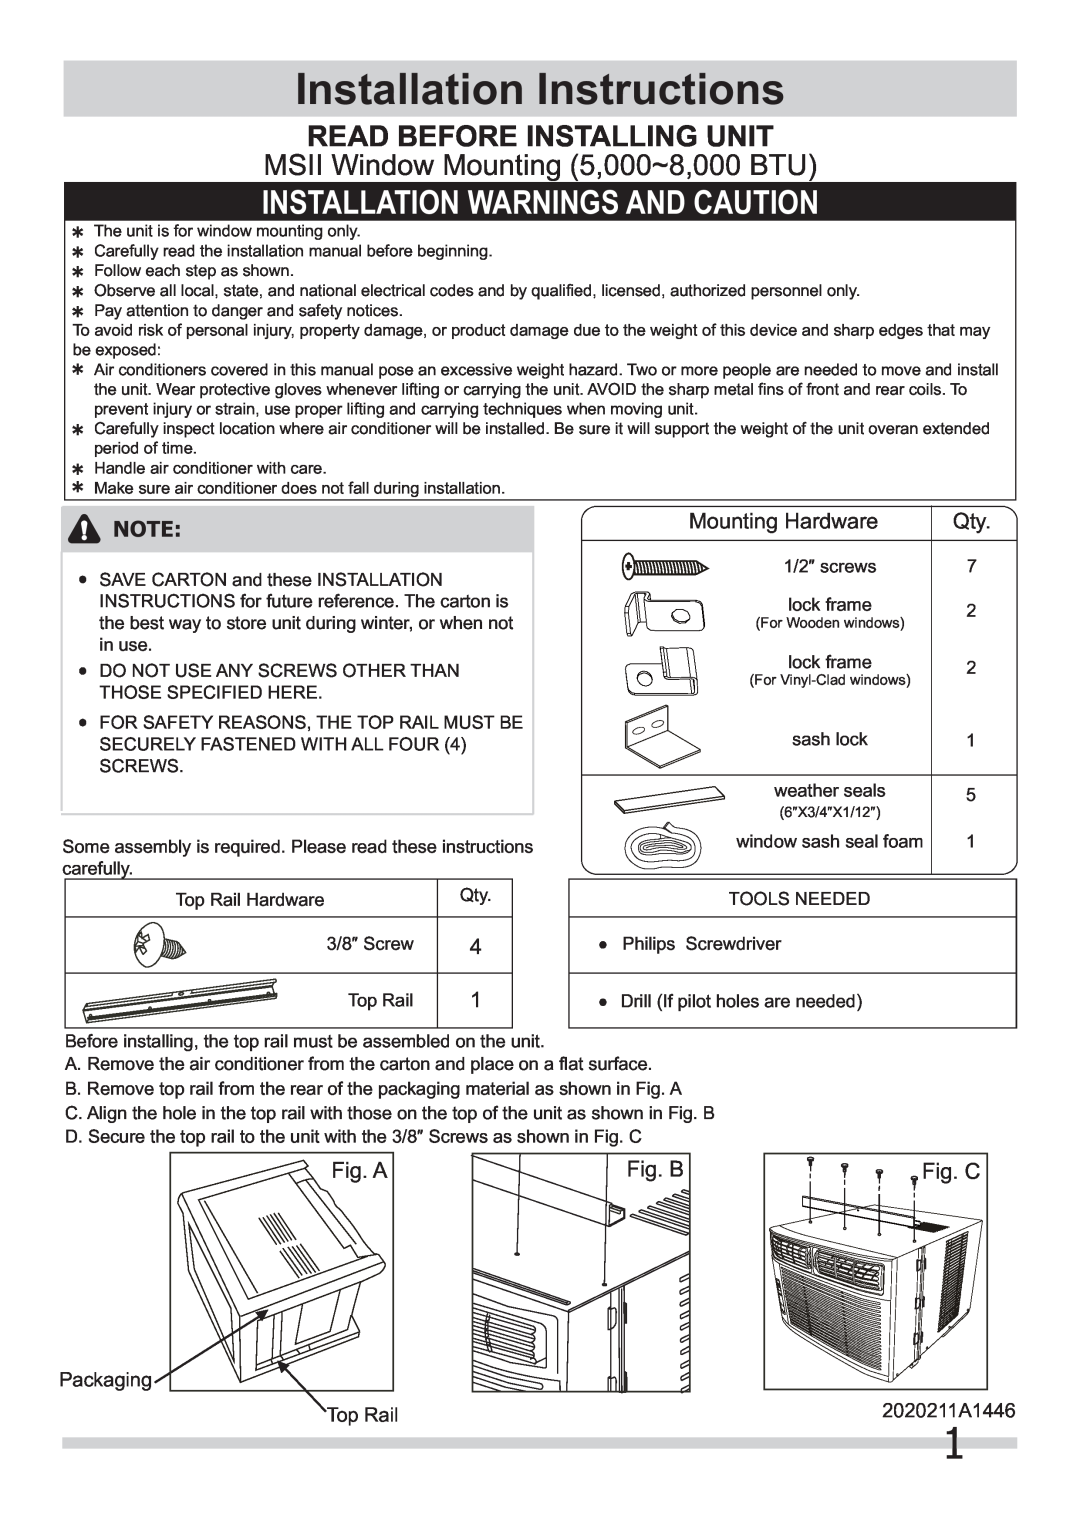 Frigidaire 2020211a1446 installation instructions Installation Instructions, Installation Warnings And Caution, Packaging 